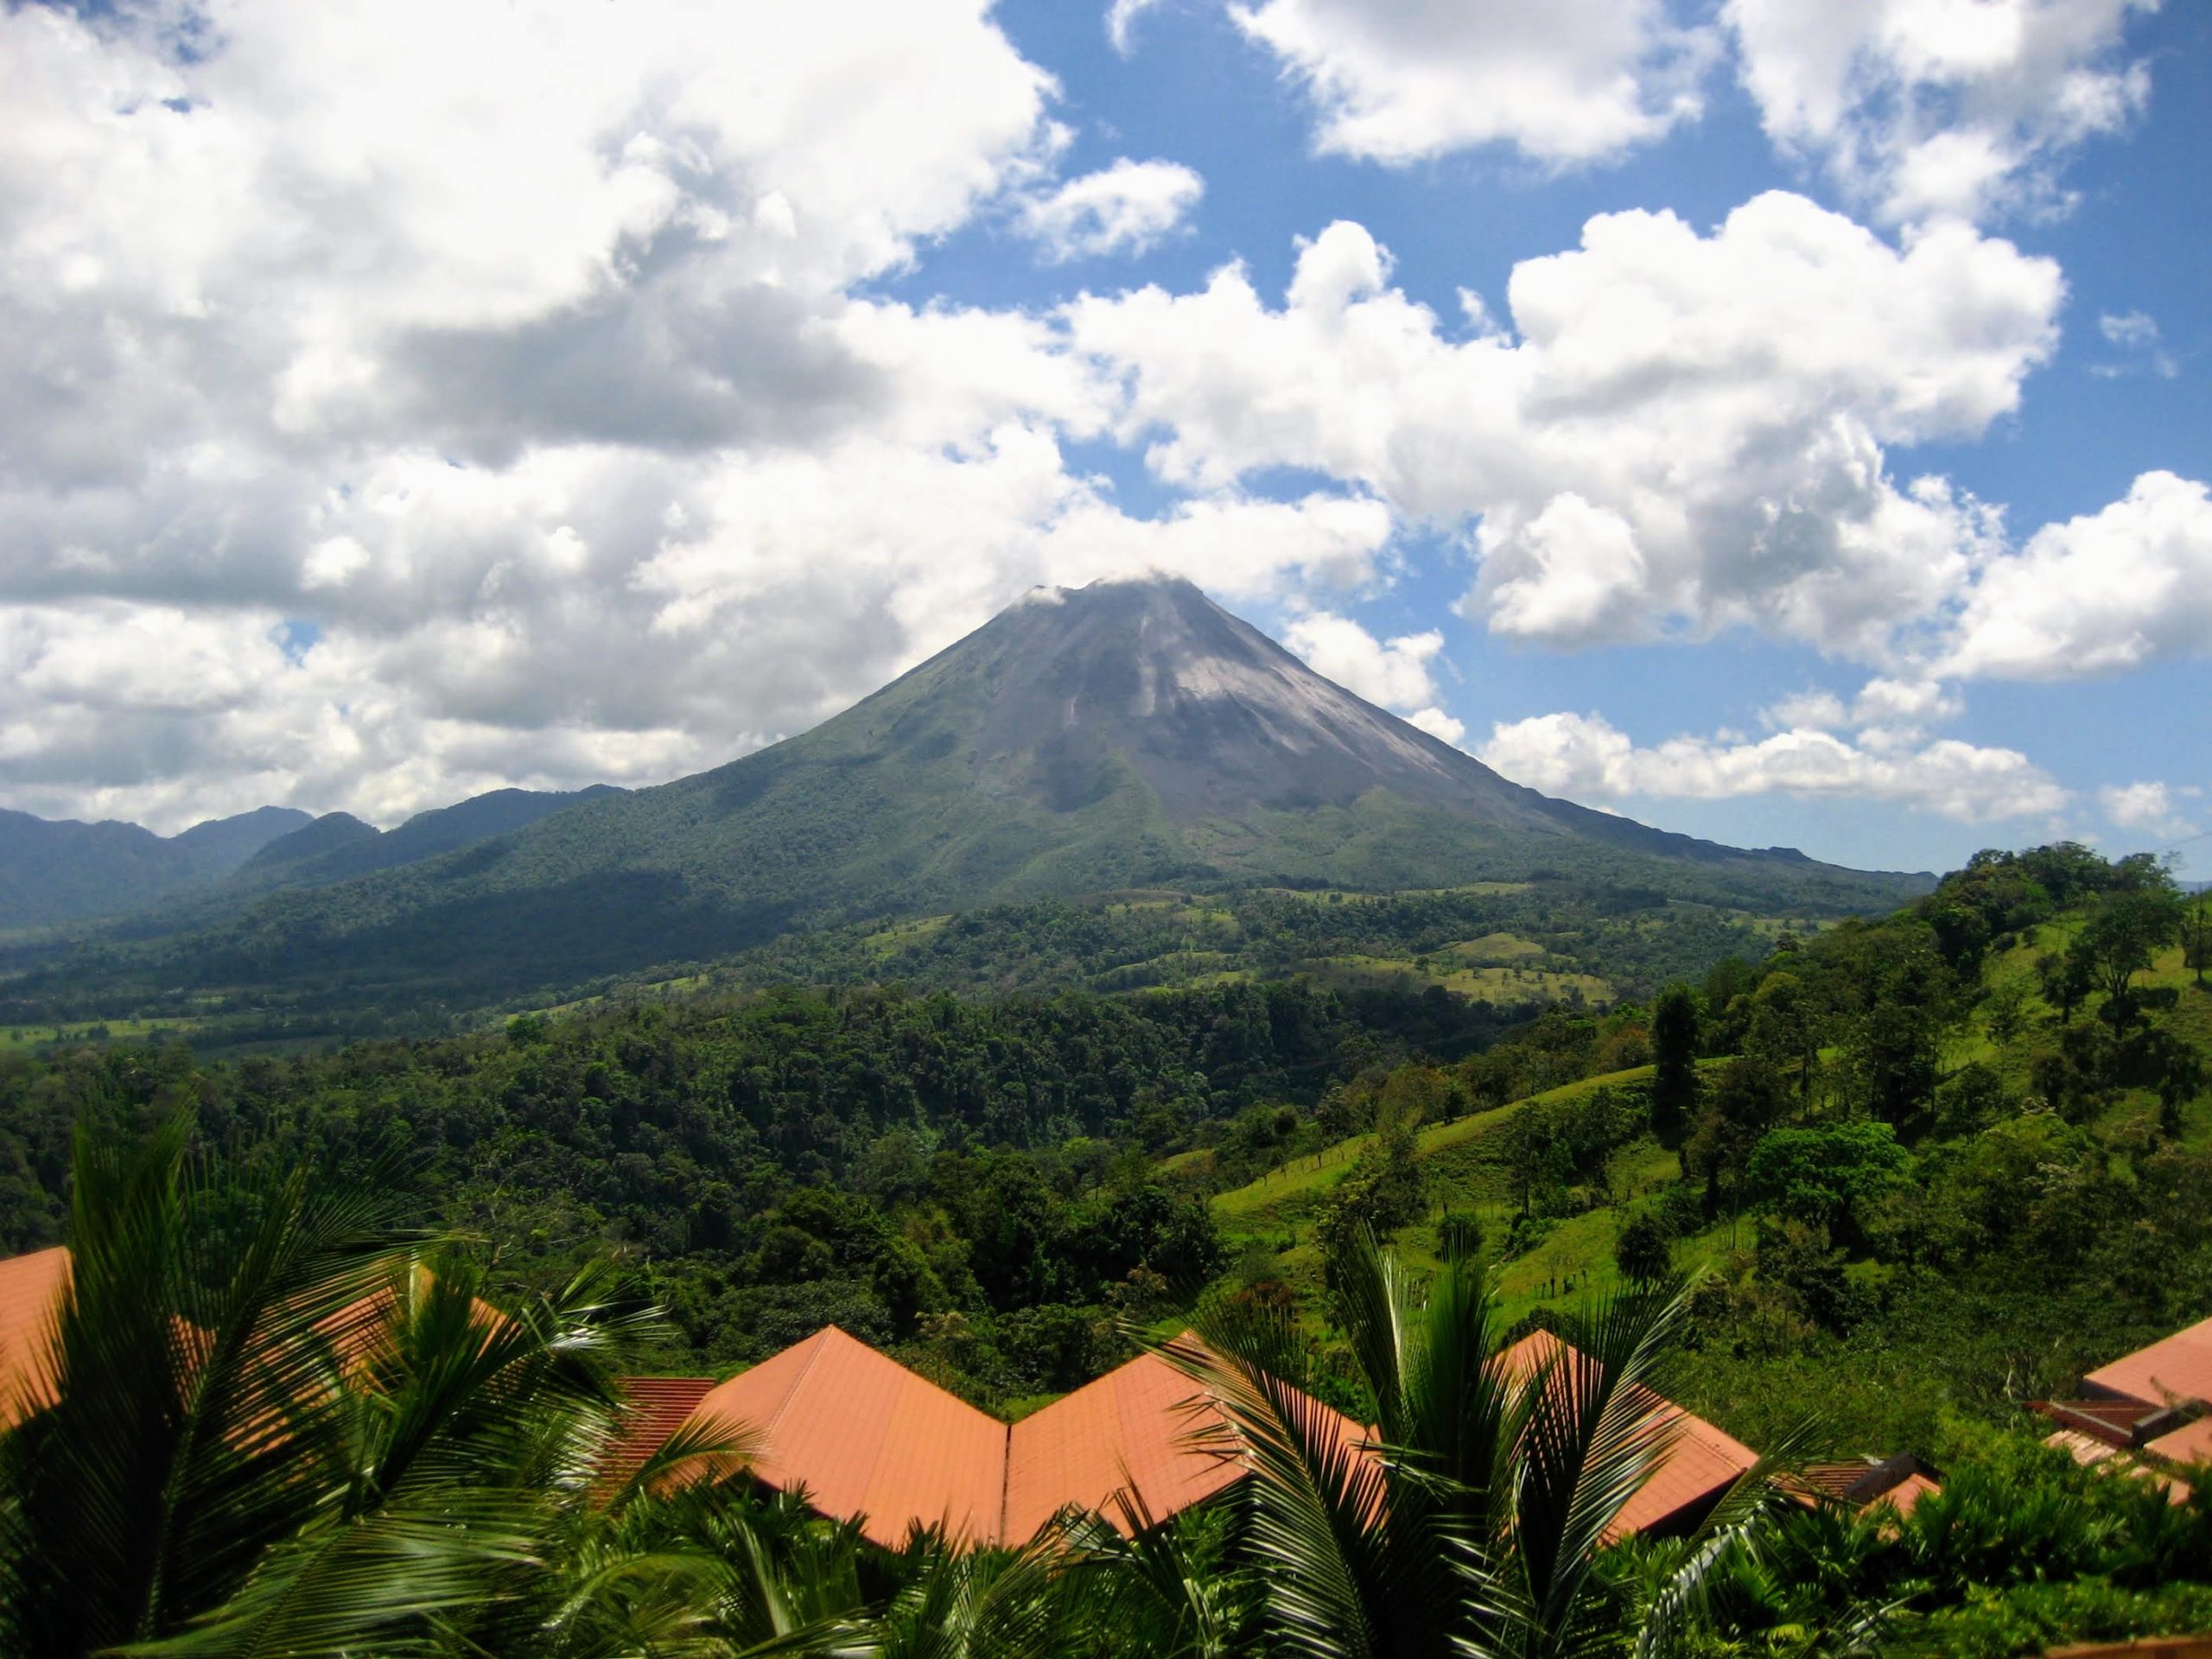 An organic and natural country.  Volcanos, road trips, animals encounters, surfing and very laid back.